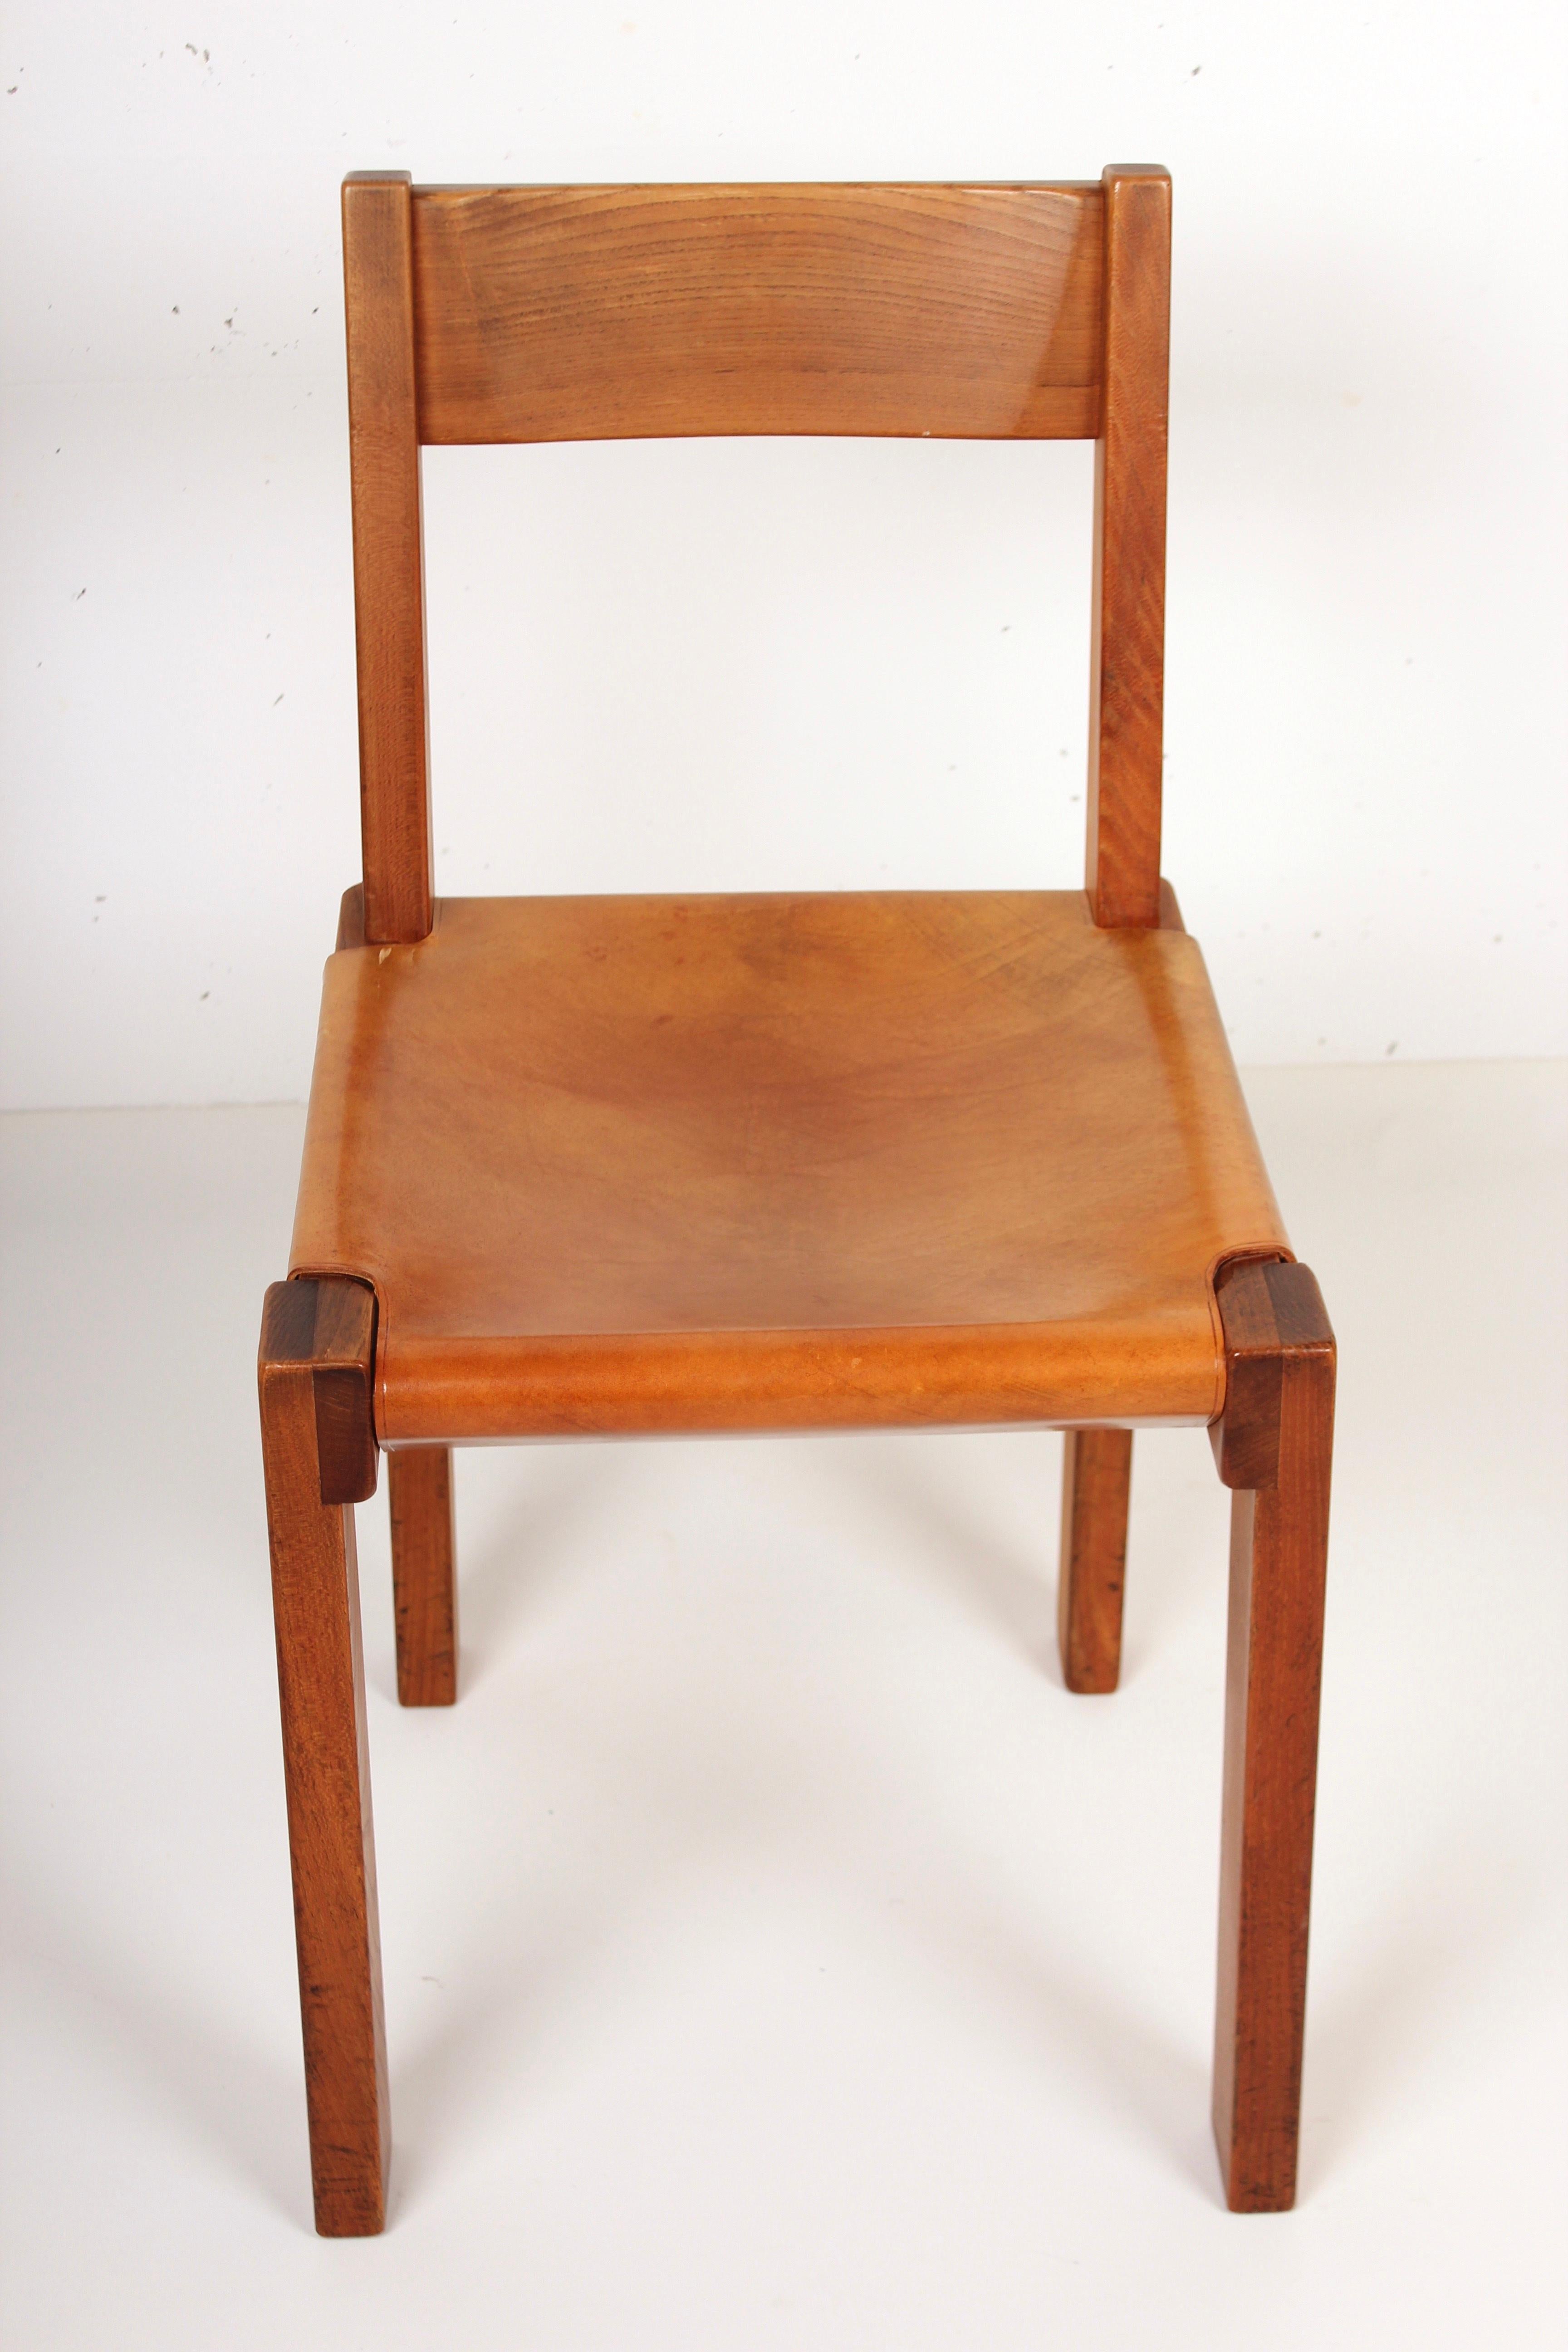 Pierre Chapo Set of Four Elm and Leather S 24 Dining Chairs, France, 1960s For Sale 11